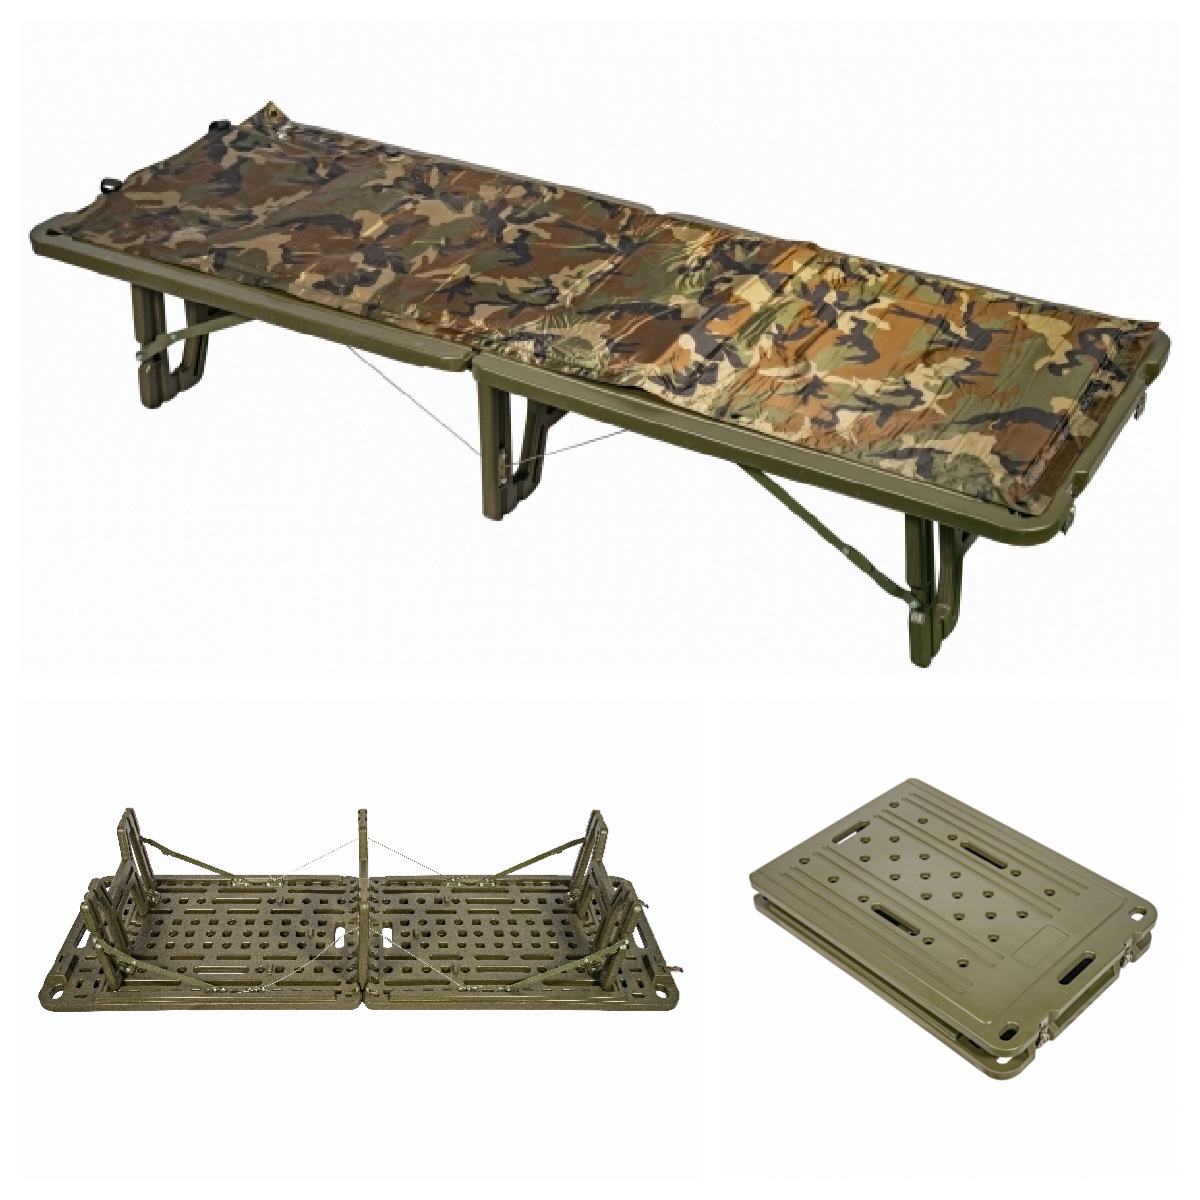 OEM/ODM Manufacturer Hospital Structure Bed - YZ02 Light-weight Military Folding Cot –